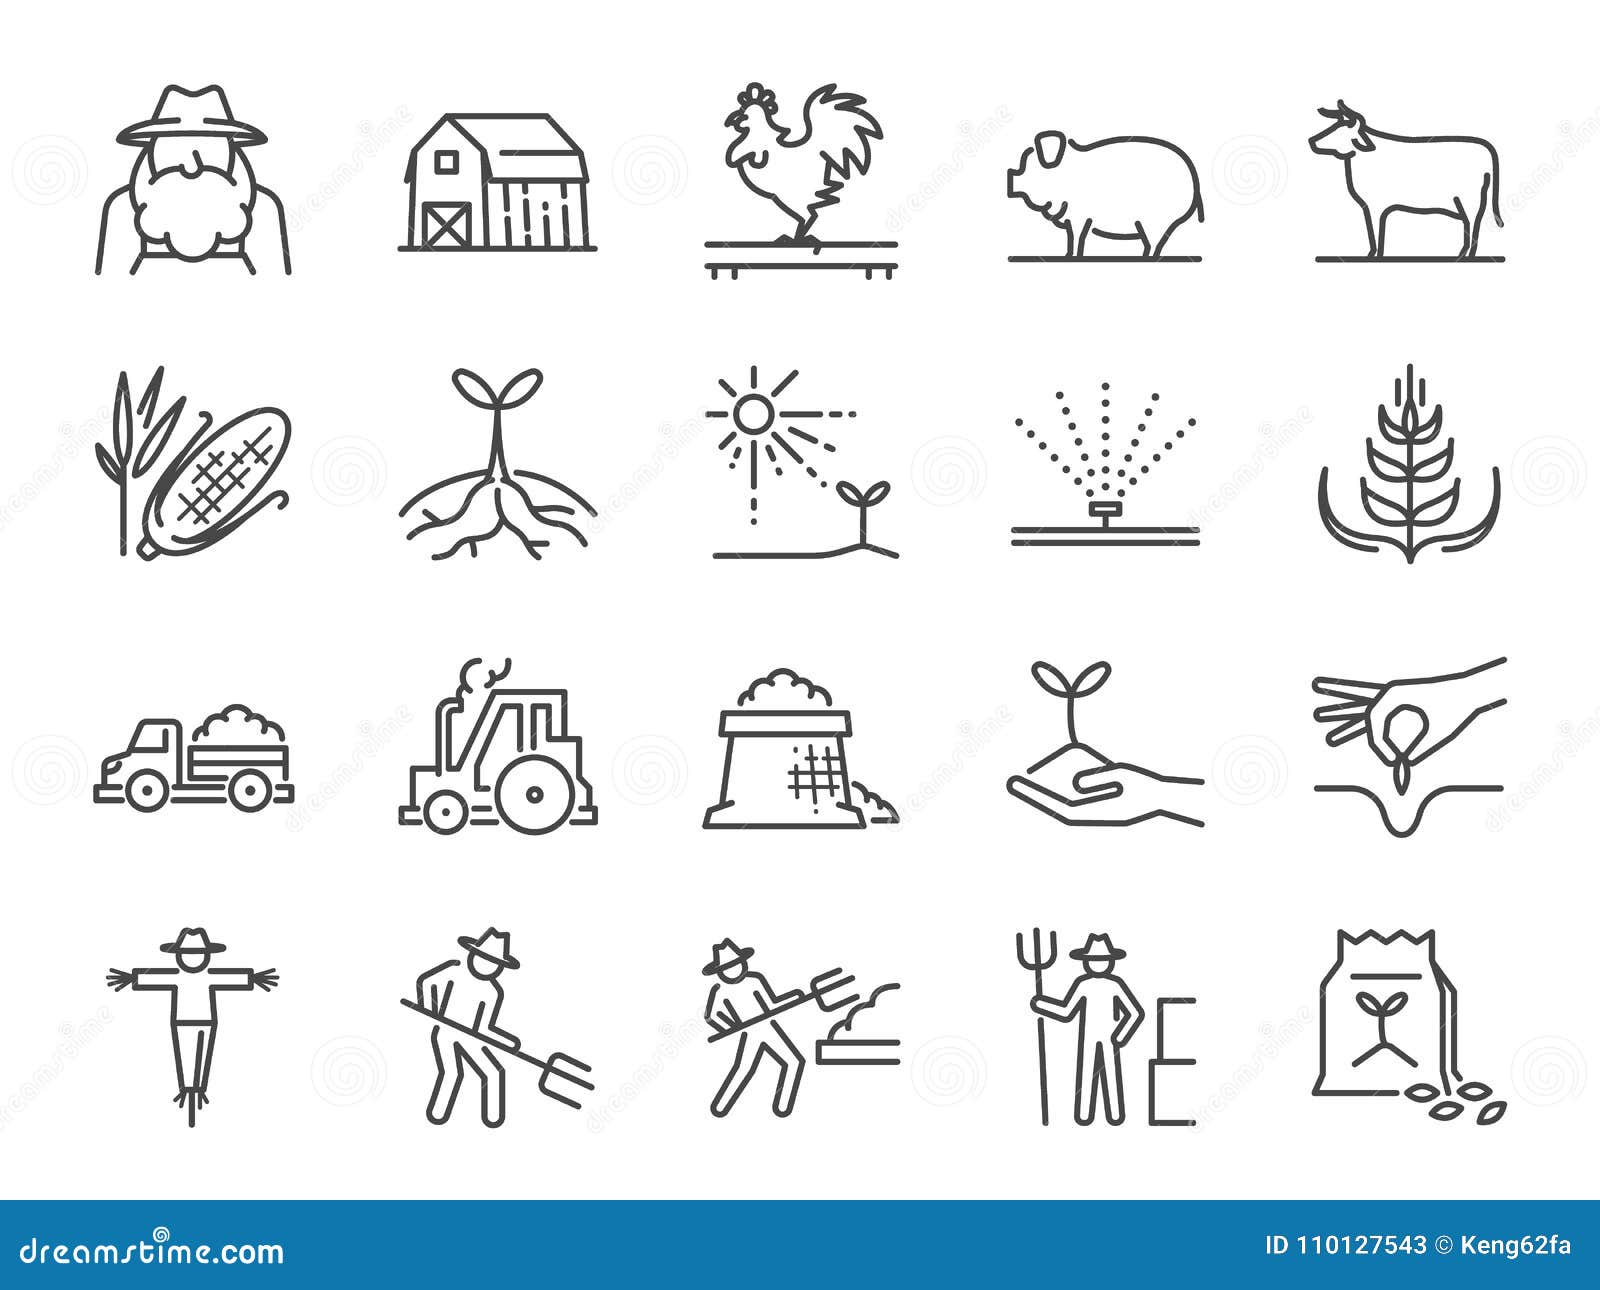 farm and agriculture line icon set. included the icons as farmer, cultivation, plant, crop, livestock, cattle, farm, barn and more